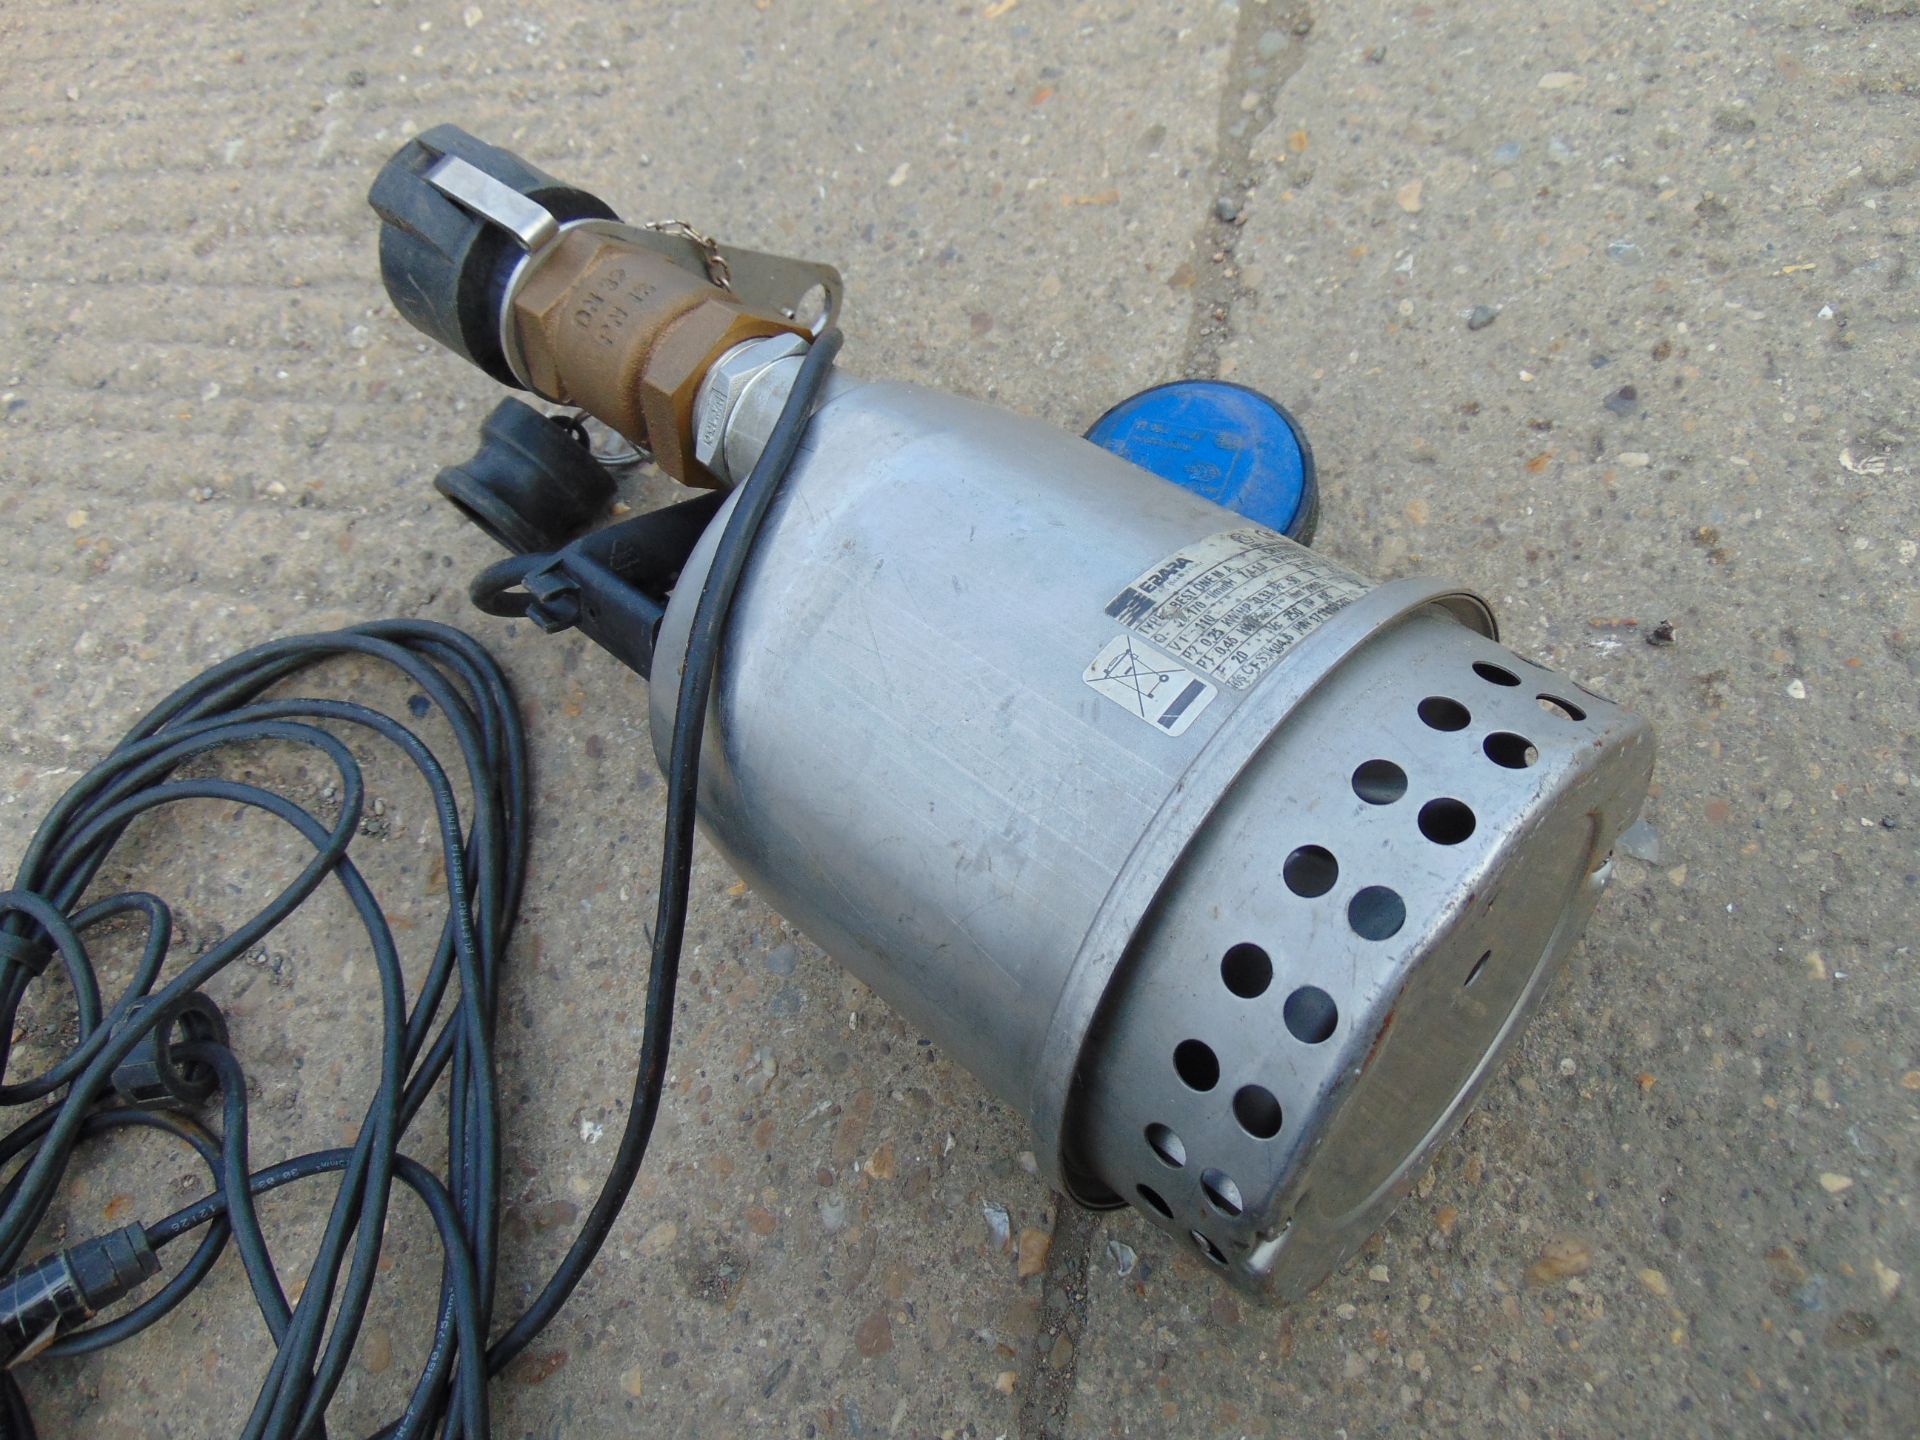 Ebara Best One MA Automatic Float Submersible Pump 110V - Image 2 of 4